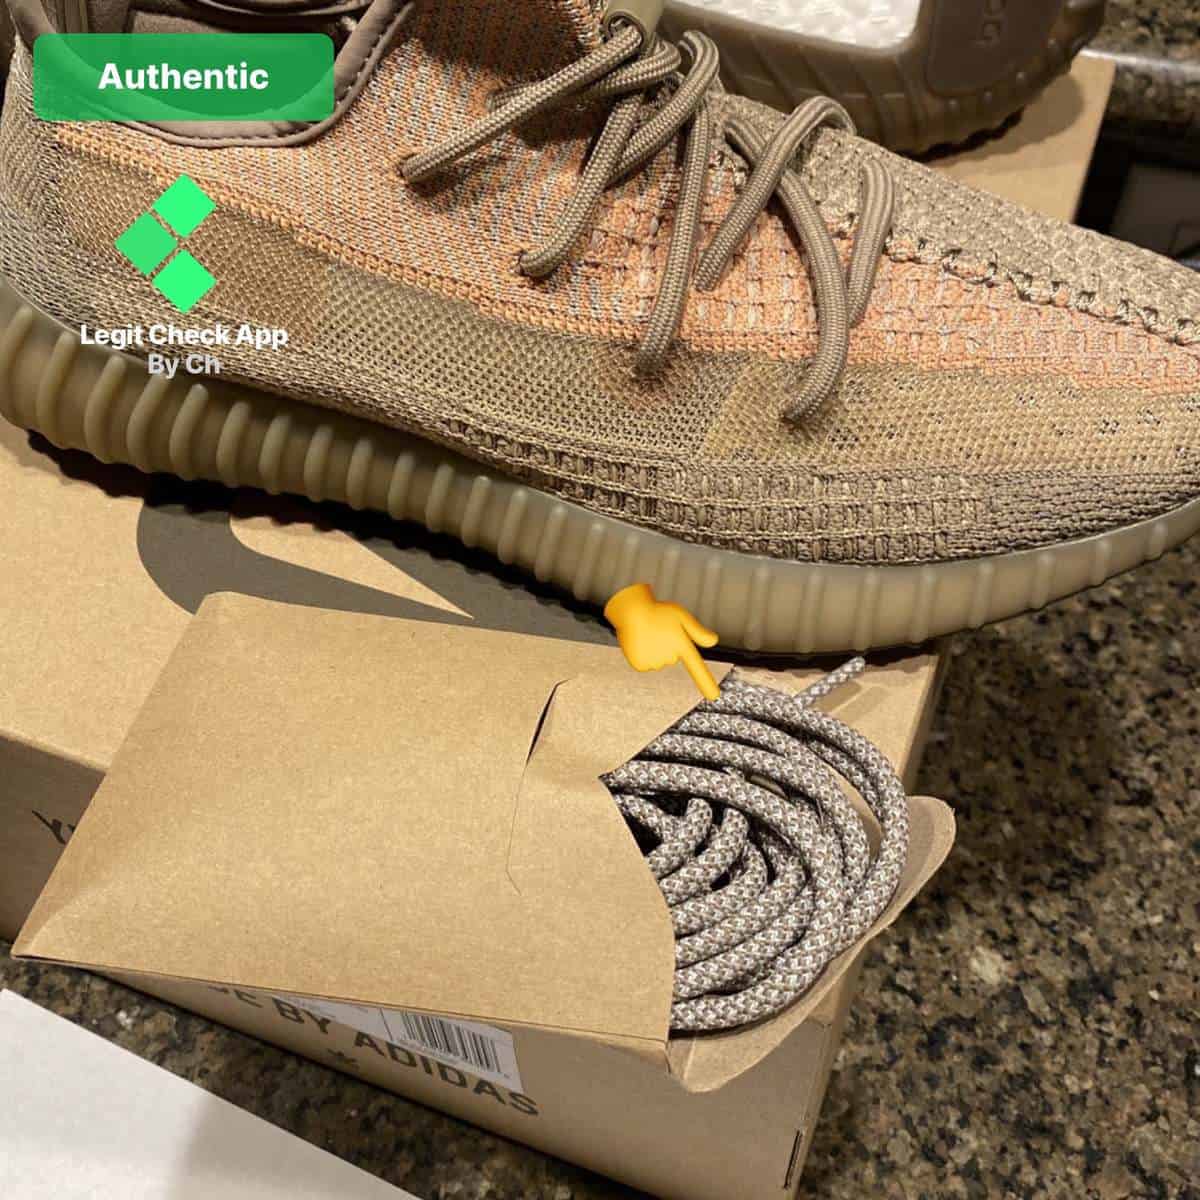 Yeezy Boost 350 V2 Sand taupe Fake Vs Real Guide (Yeezy